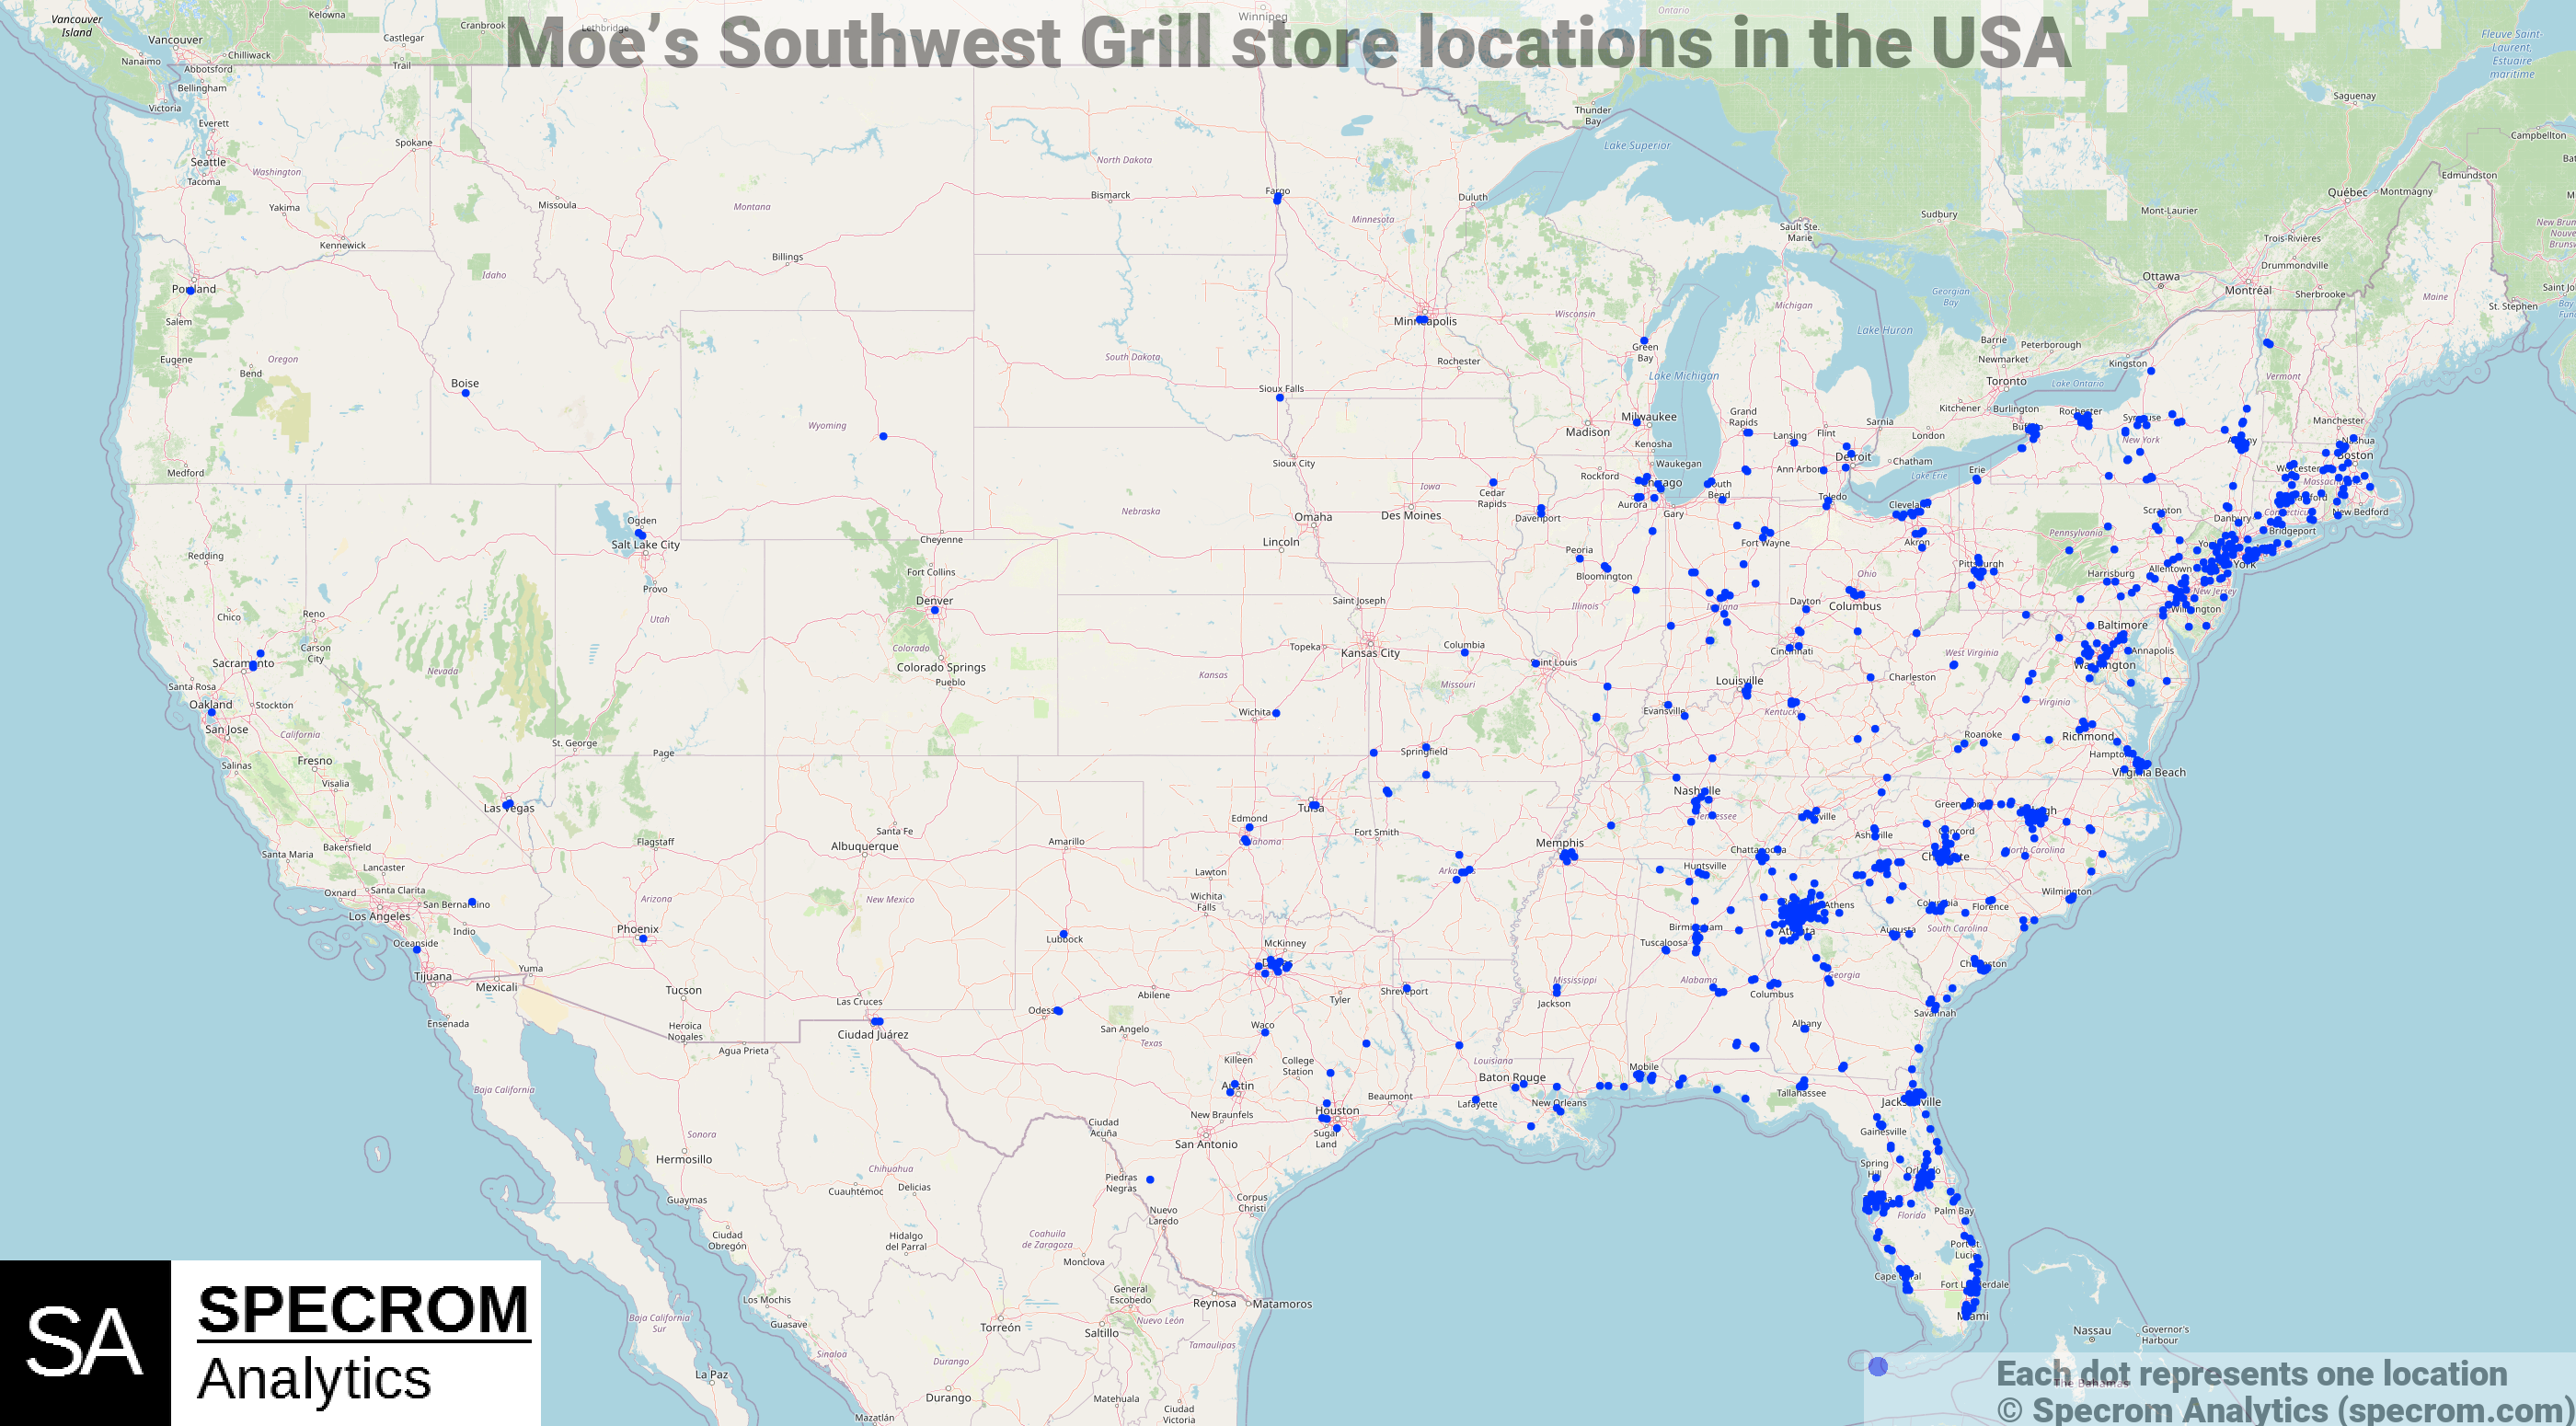 Moe's Southwest Grill store locations in the USA